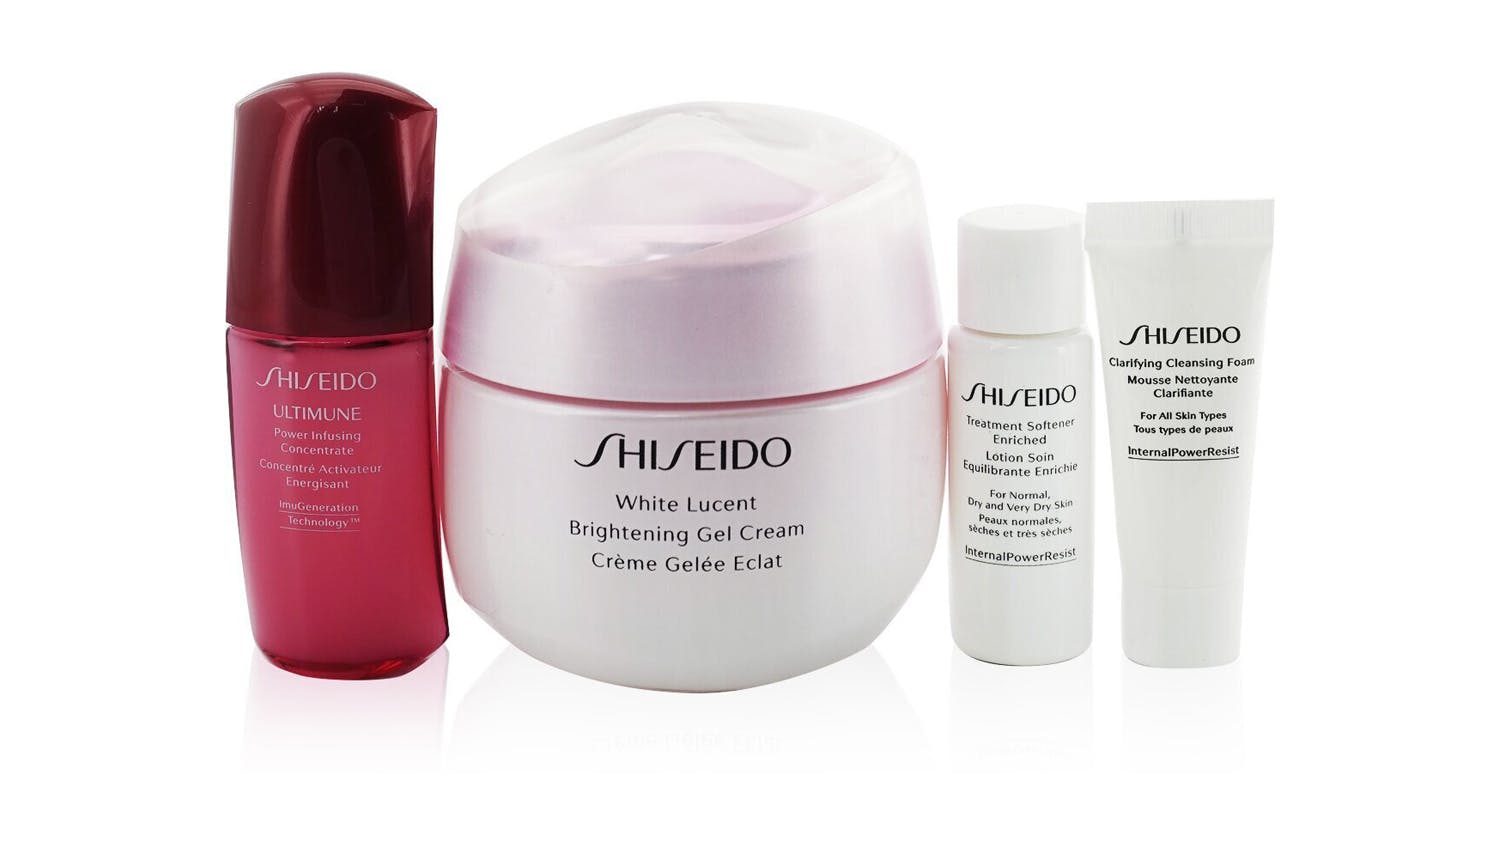 White Lucent Holiday Set: Gel Cream 50ml + Cleansing Foam 5ml + Softener Enriched 7ml + Ultimune Concentrate 10ml - 4pcs